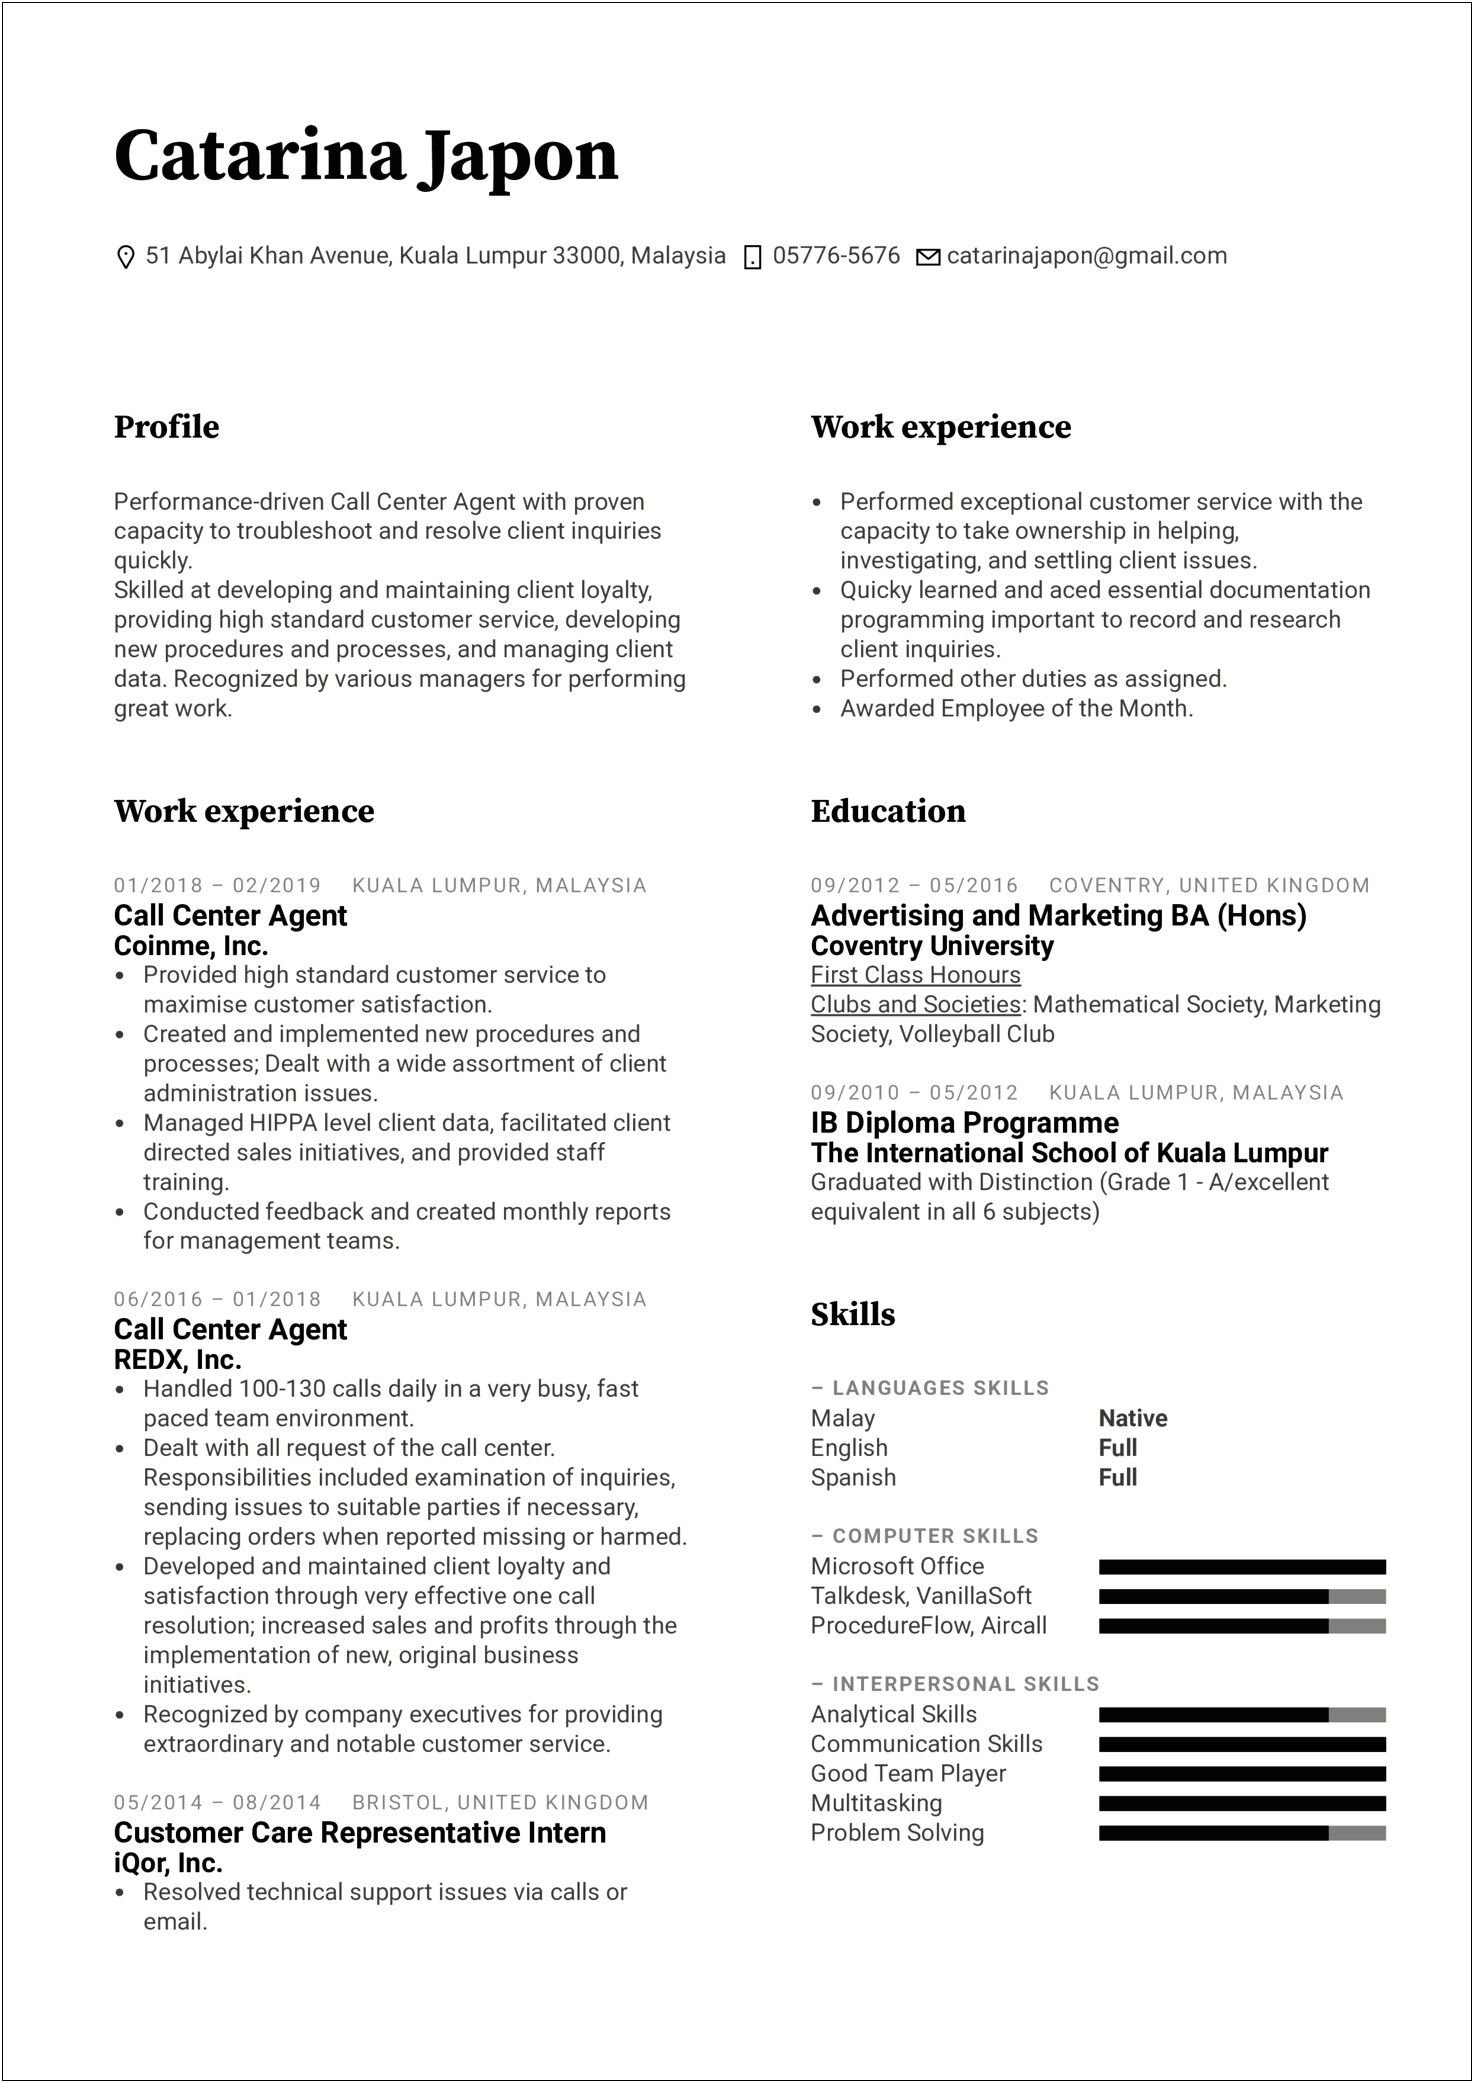 Example Of Team Player On Resume